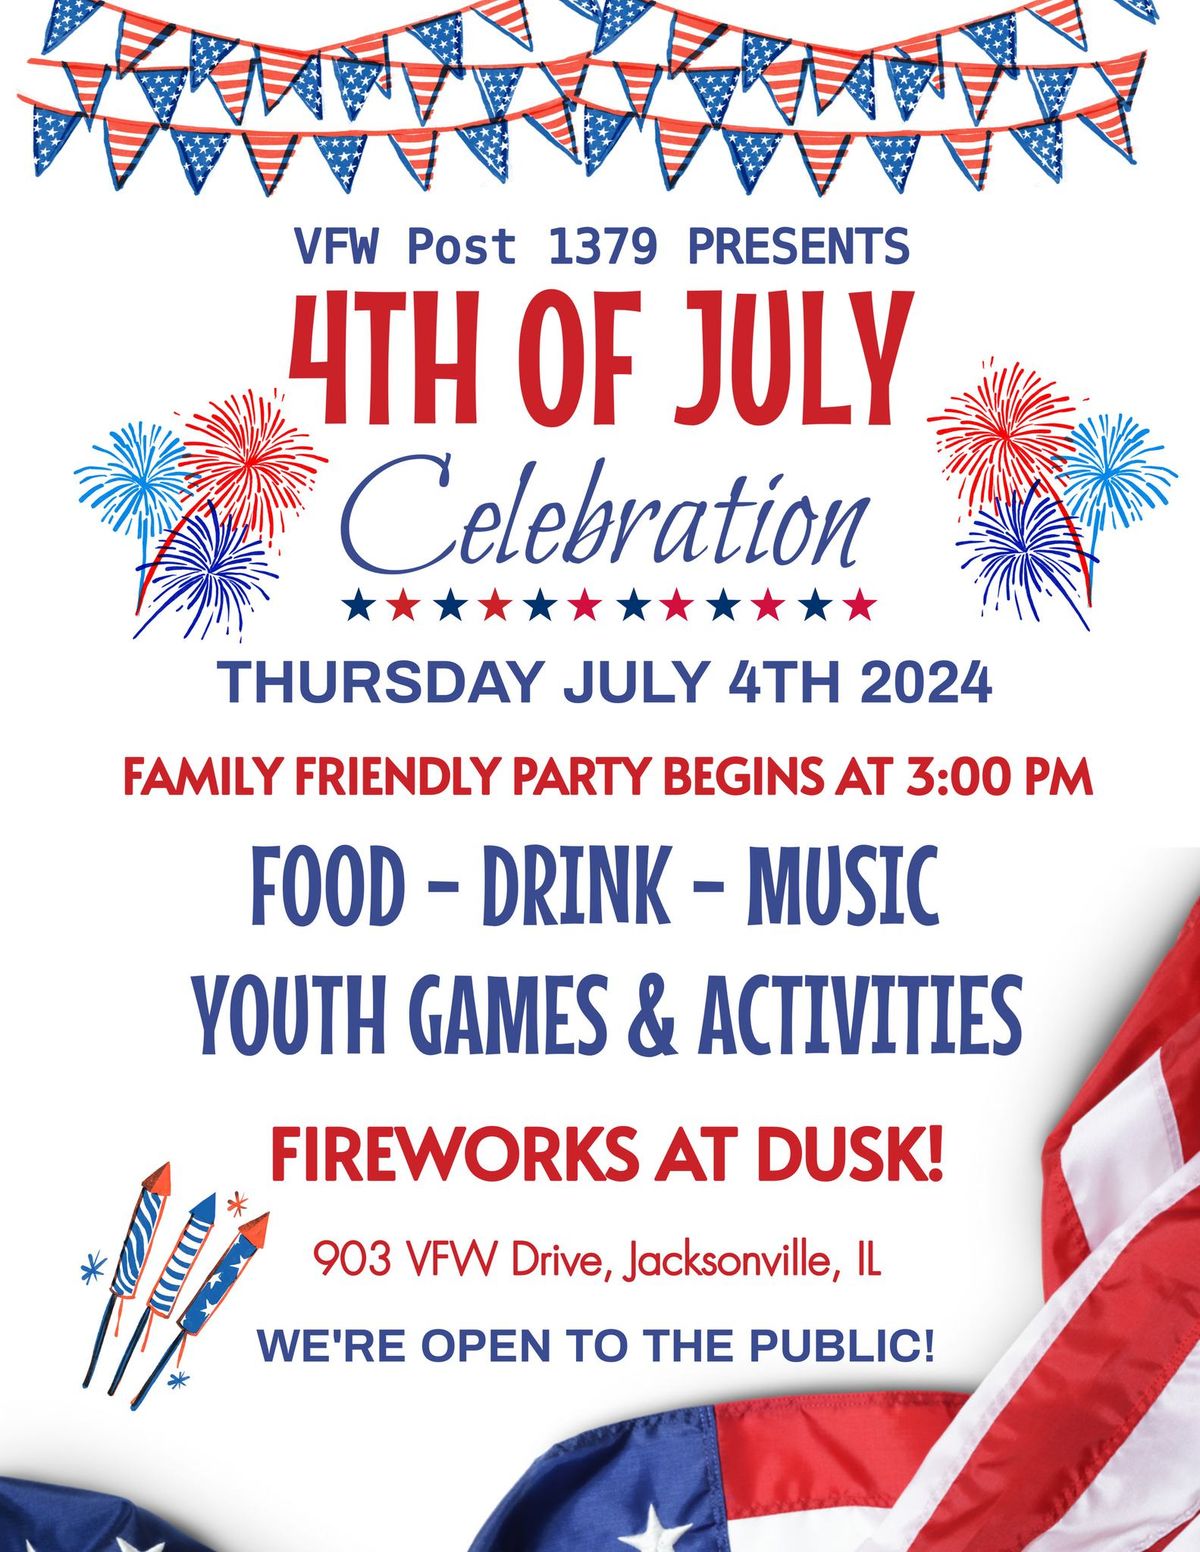 4th of July Celebration at the VFW!